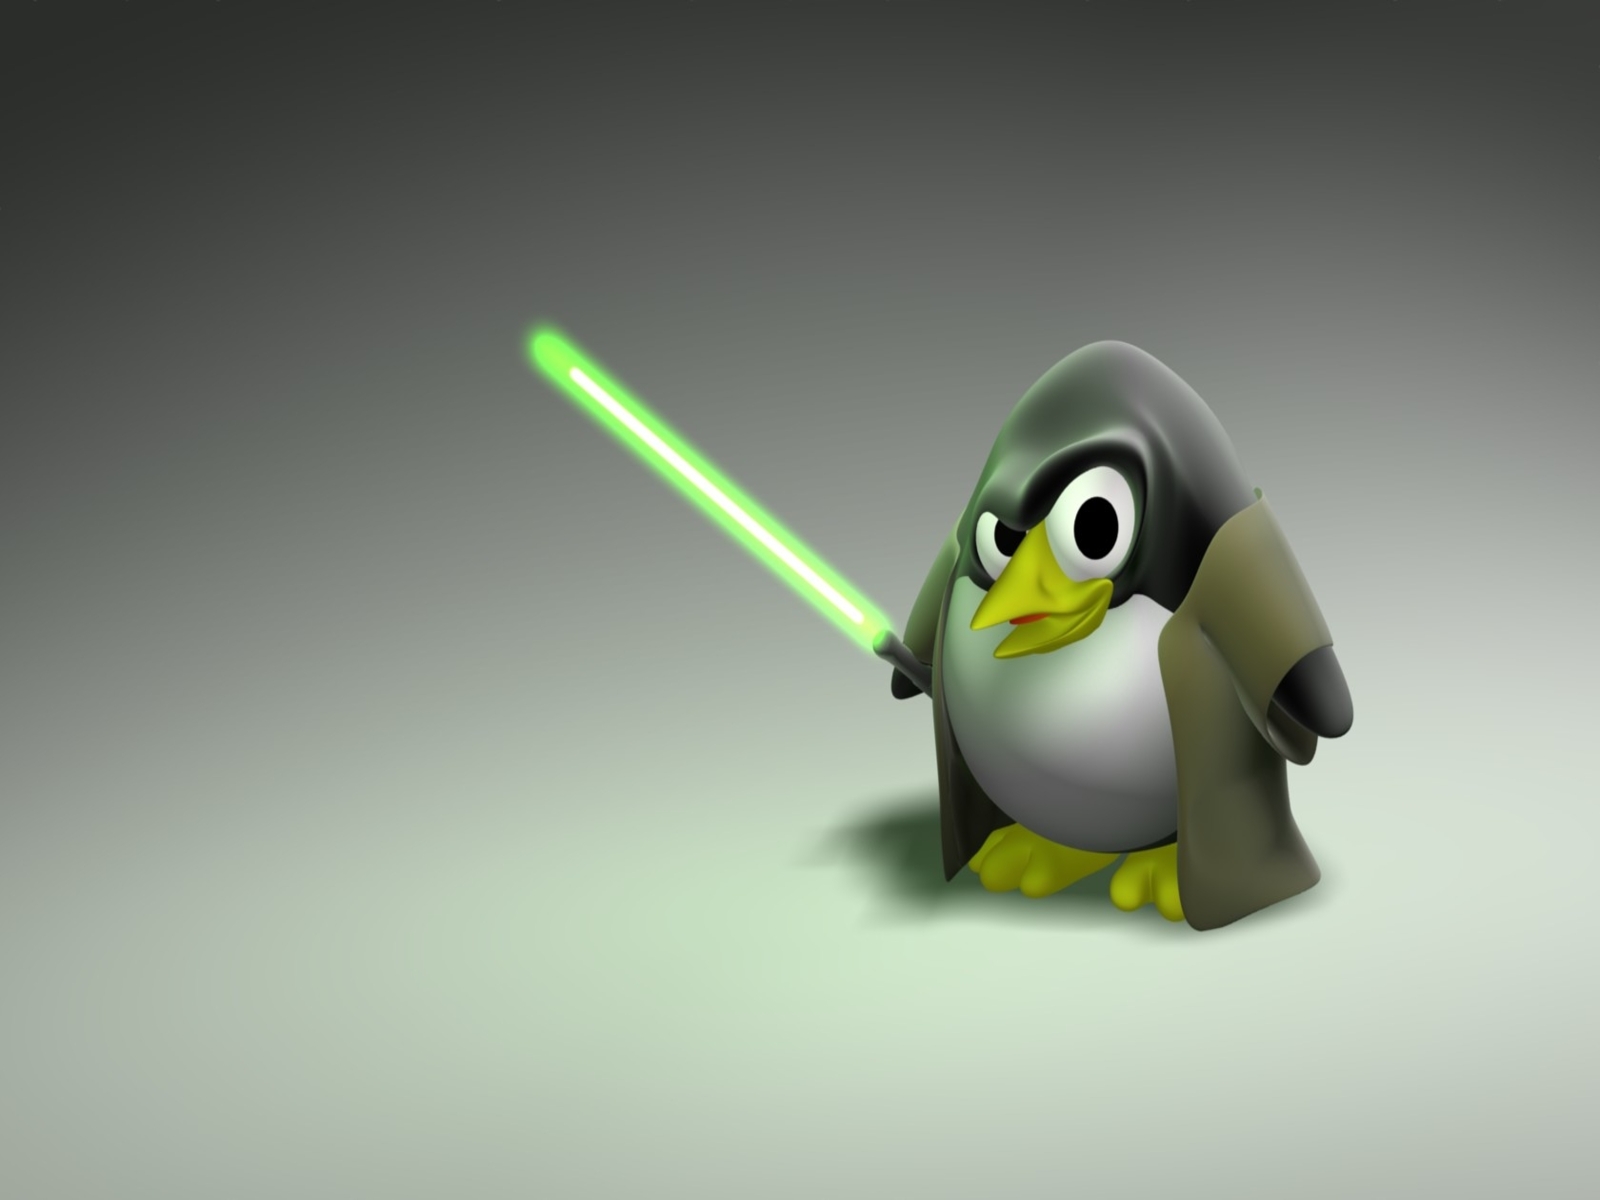 Linux Background   Linux Backgrounds and Wallpapers